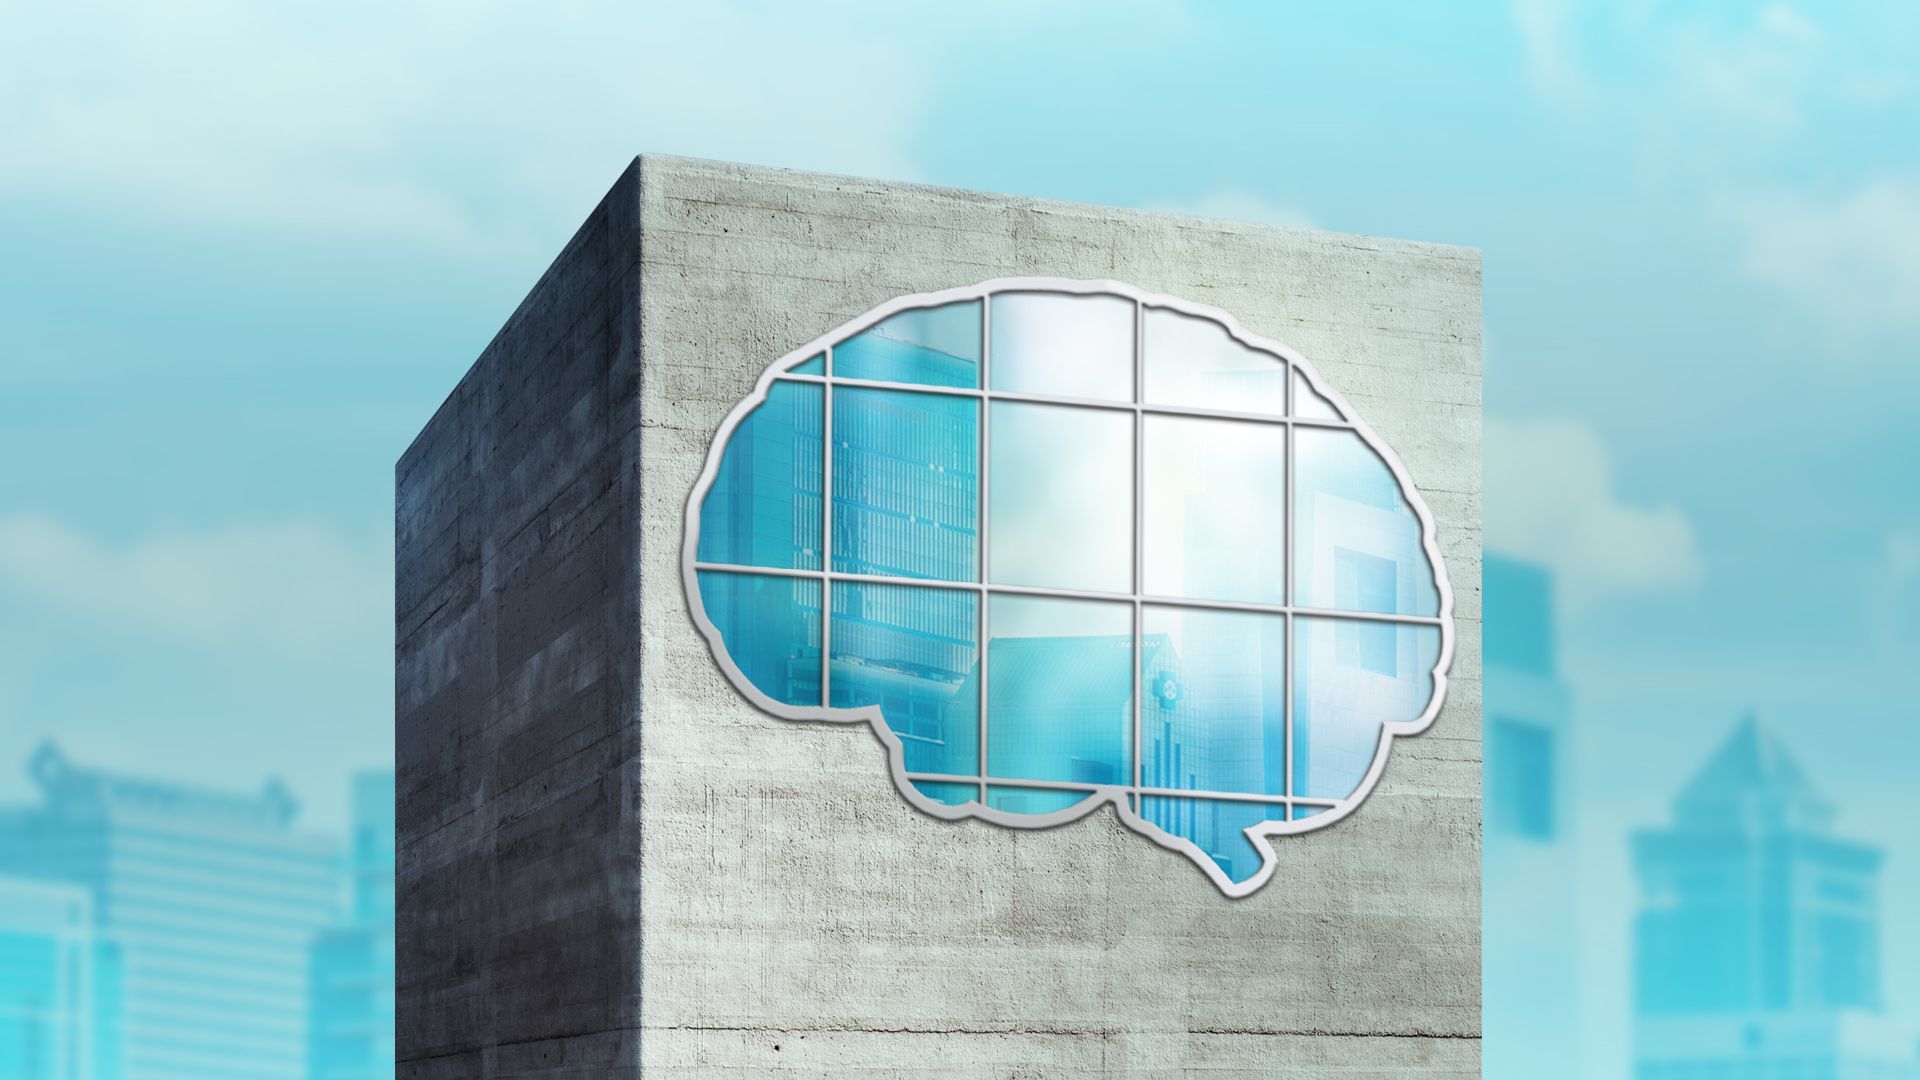 Illustration of a building in a city with a brain-shaped window